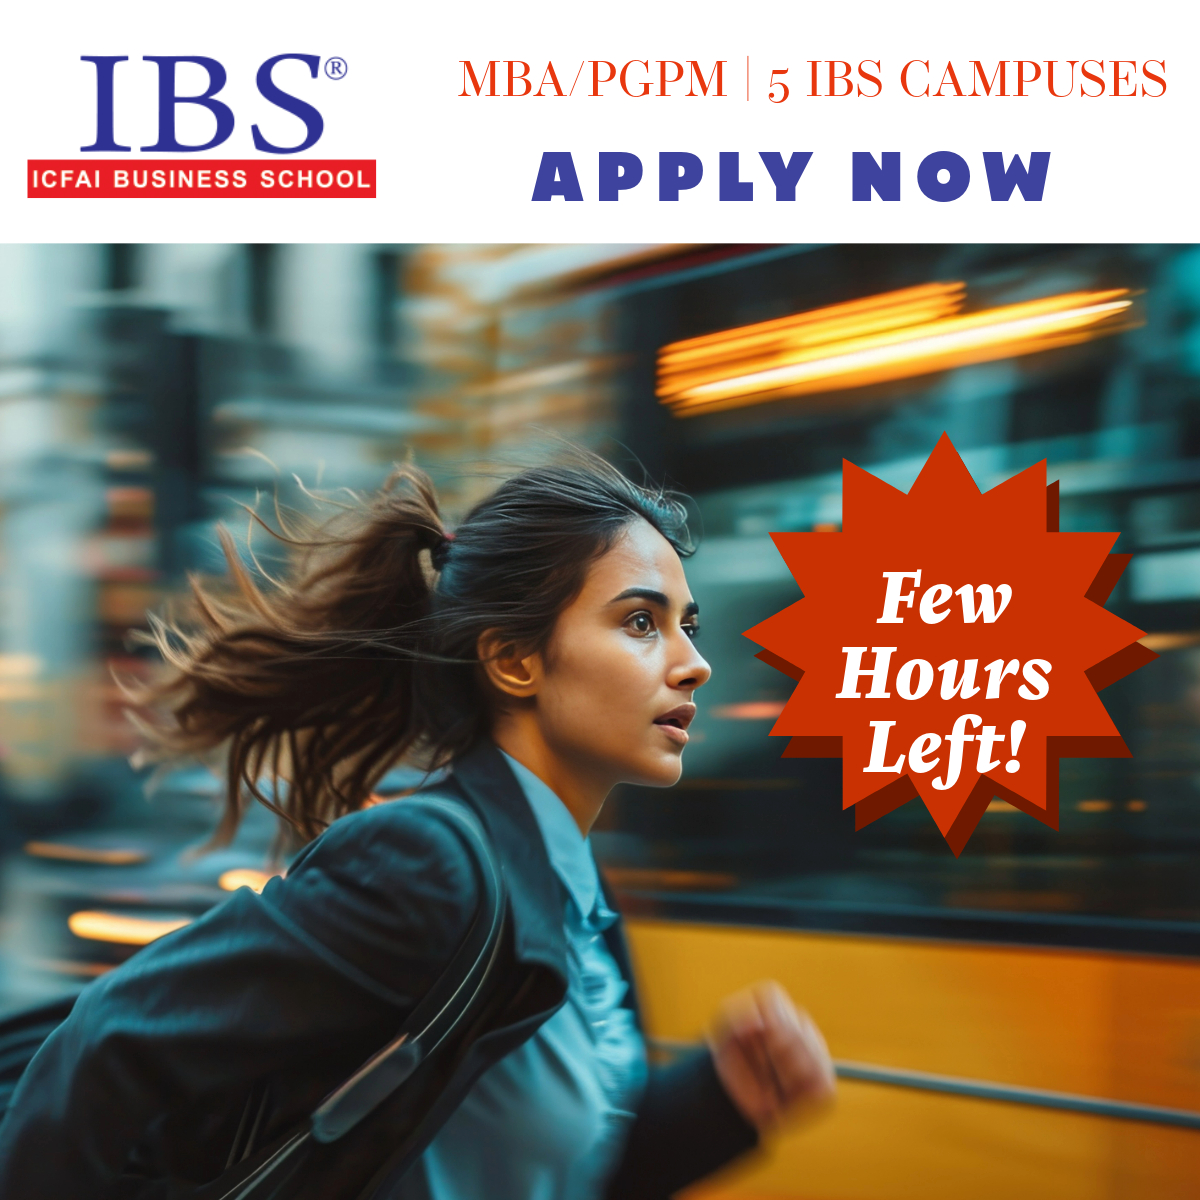 📢 Only few hours left!
🚦 Don't miss this opportunity!

Applications for 5 IBS Campuses will close today!
#IBSAhmedabad #Dehradun #IBSGurgaon #IBSKolkata #IBSPune
🎓 MBA/PGPM 2024-26
✅ Apply Now bit.ly/44j6qzV

Why IBS?

🌍 10% of 66000+ Alumni work at global locations…